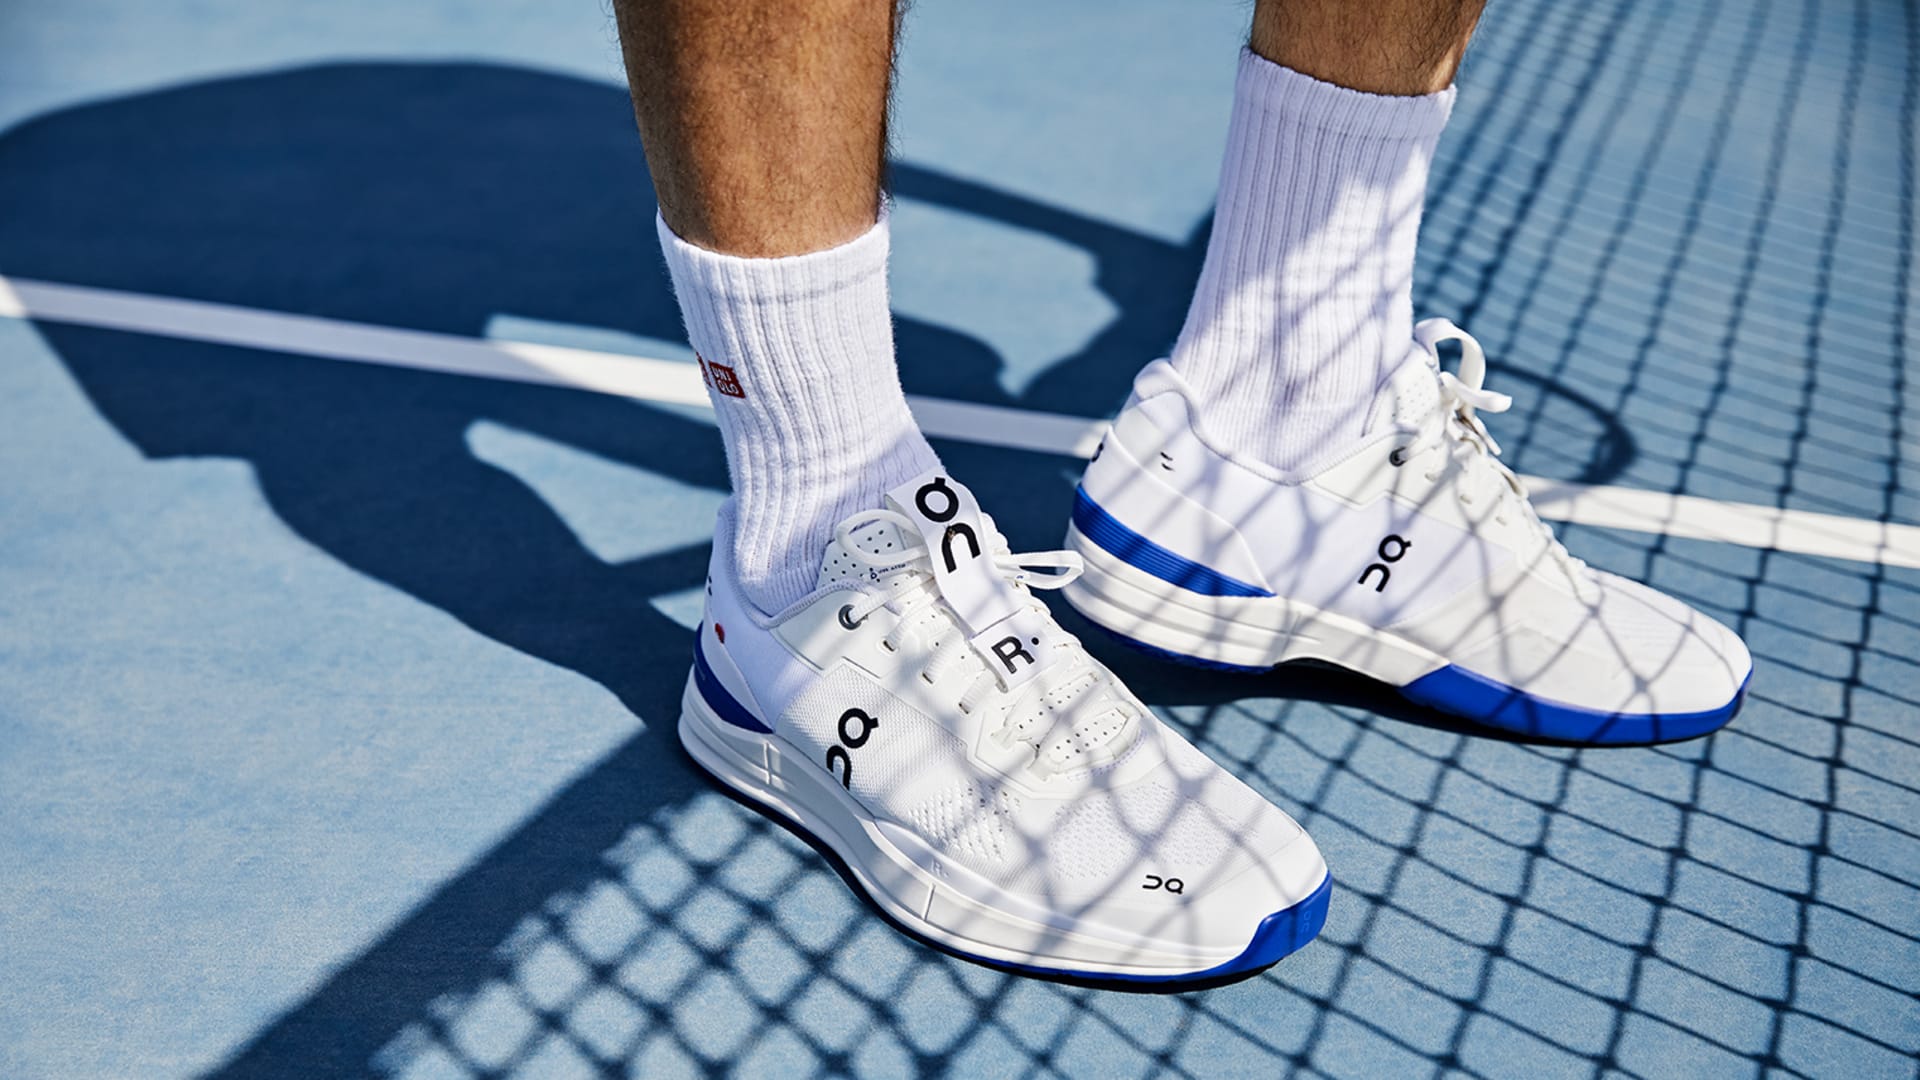 Oceania Army grown up Game On: In Doha return, Federer trades Nike shoes for "THE ROGER Pro"